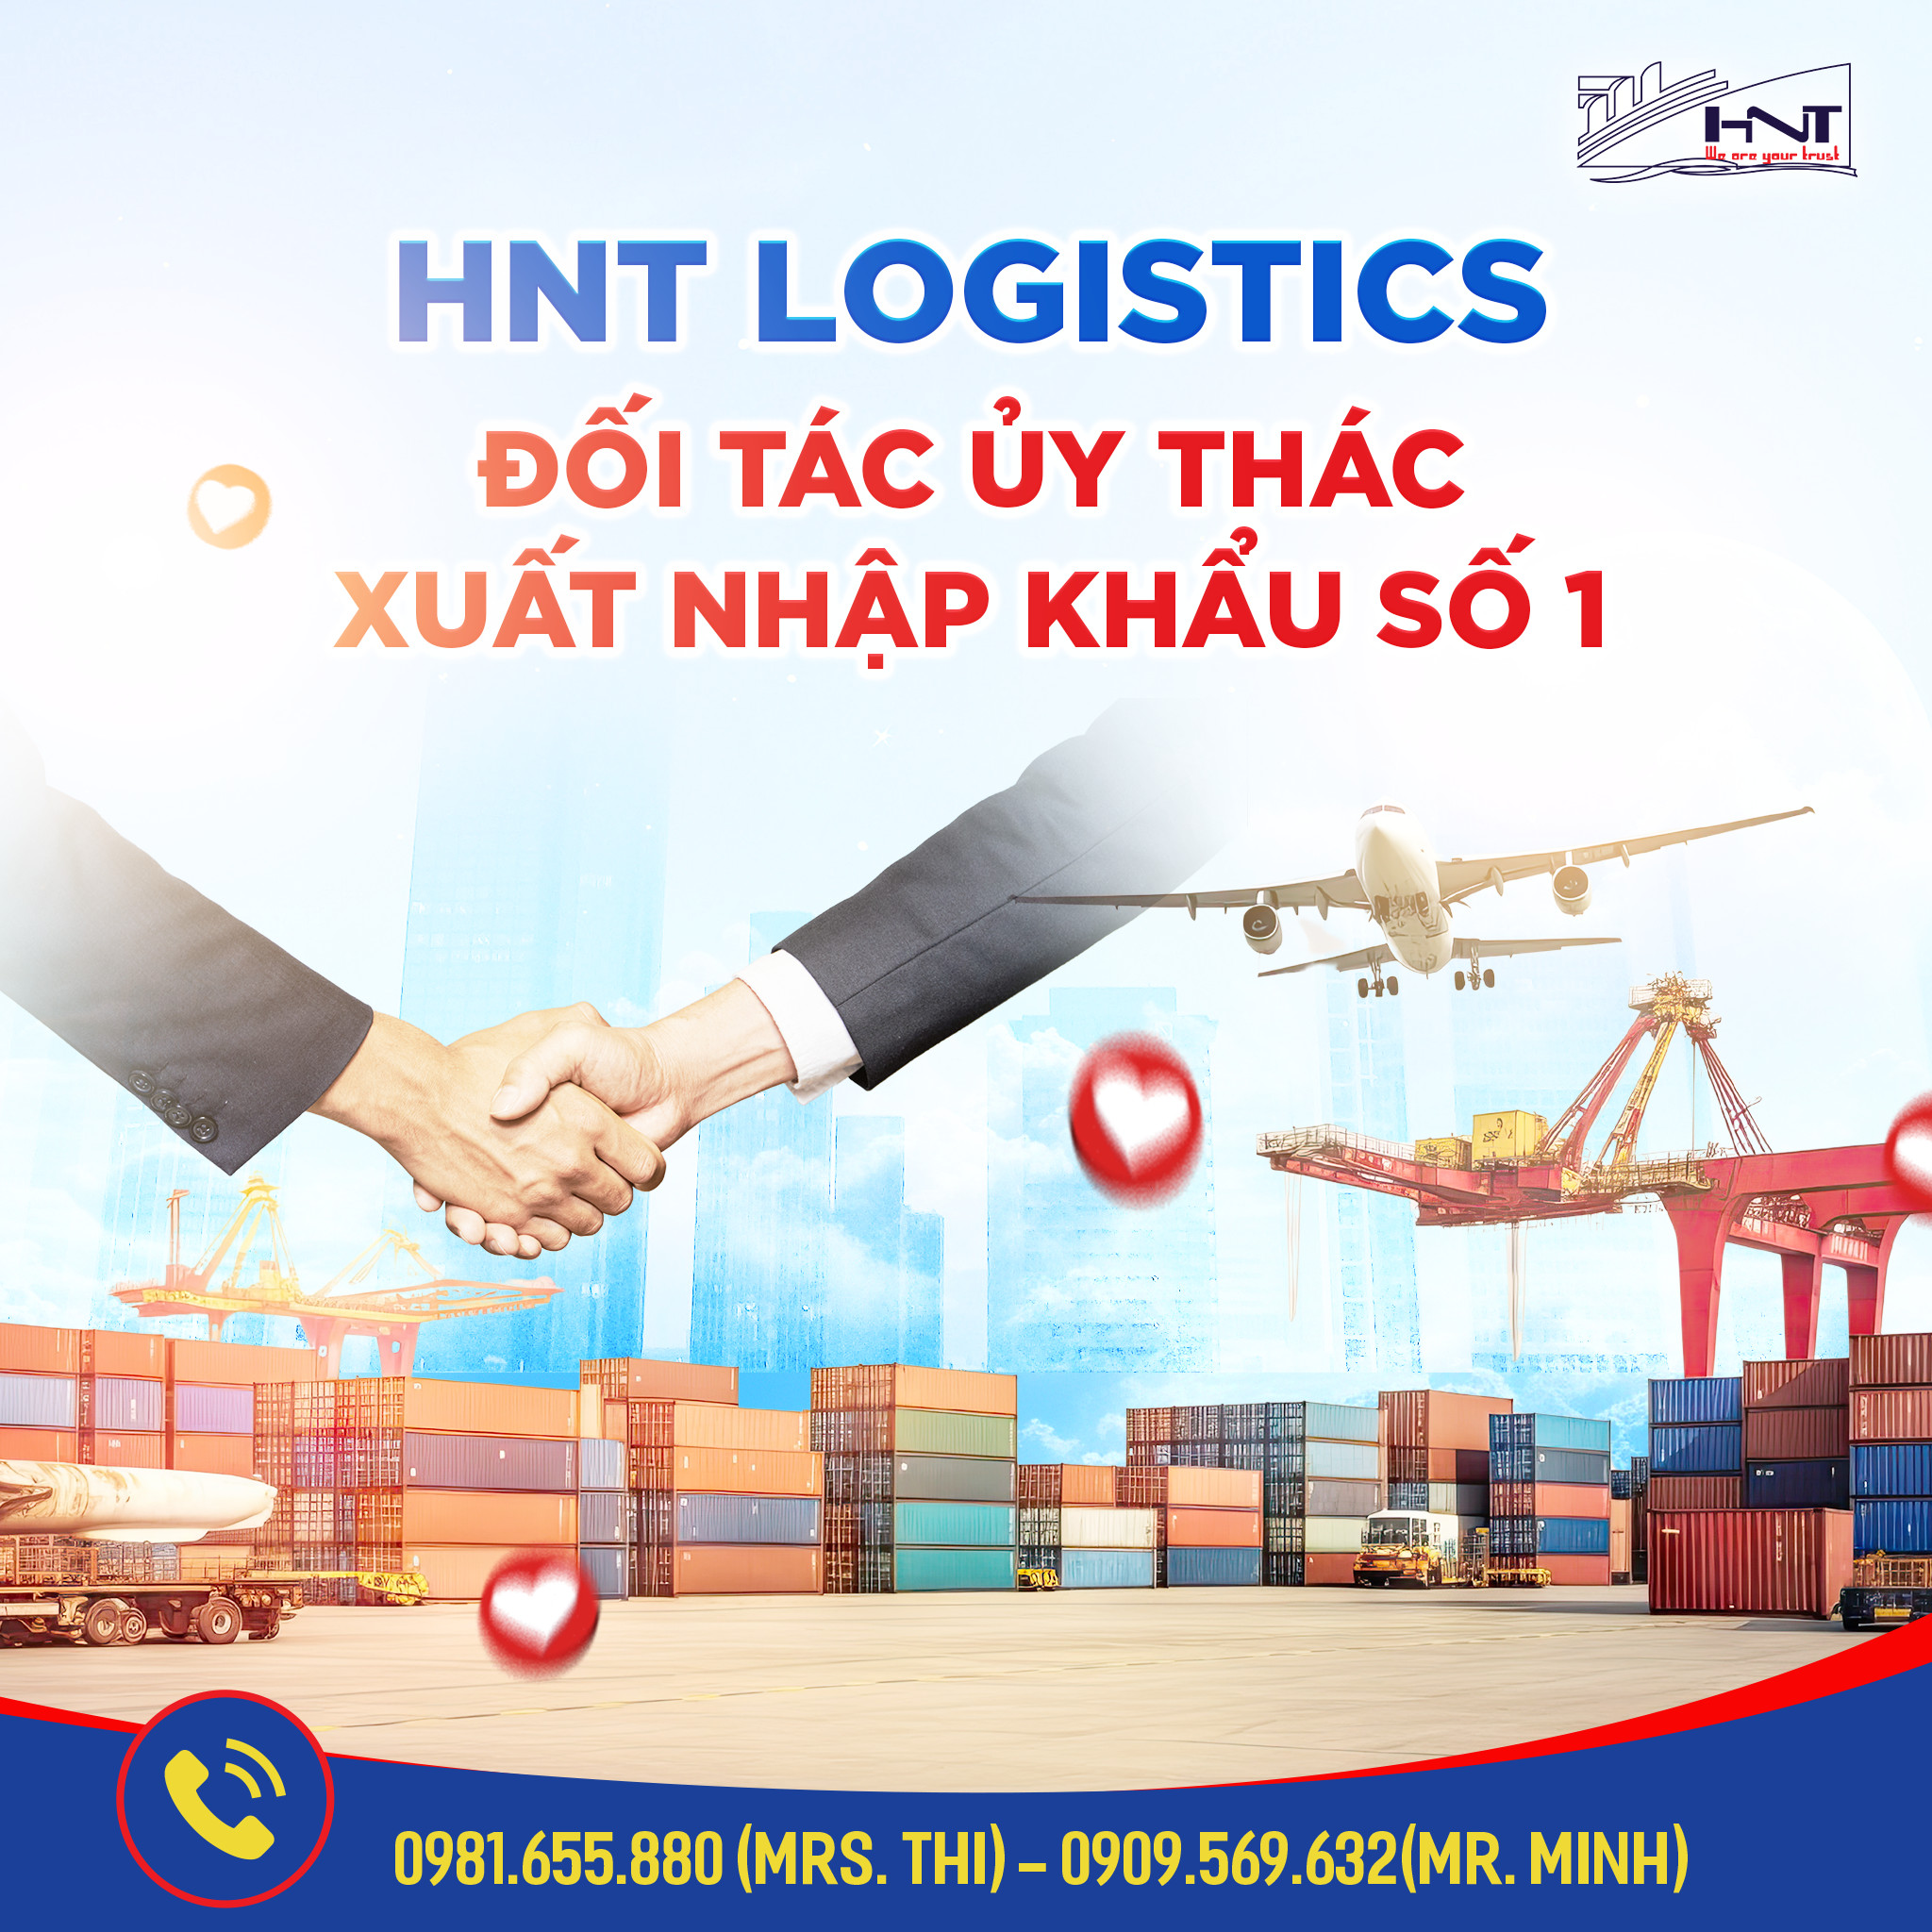 HNT Logistics provides full import and export services ho chi minh city.